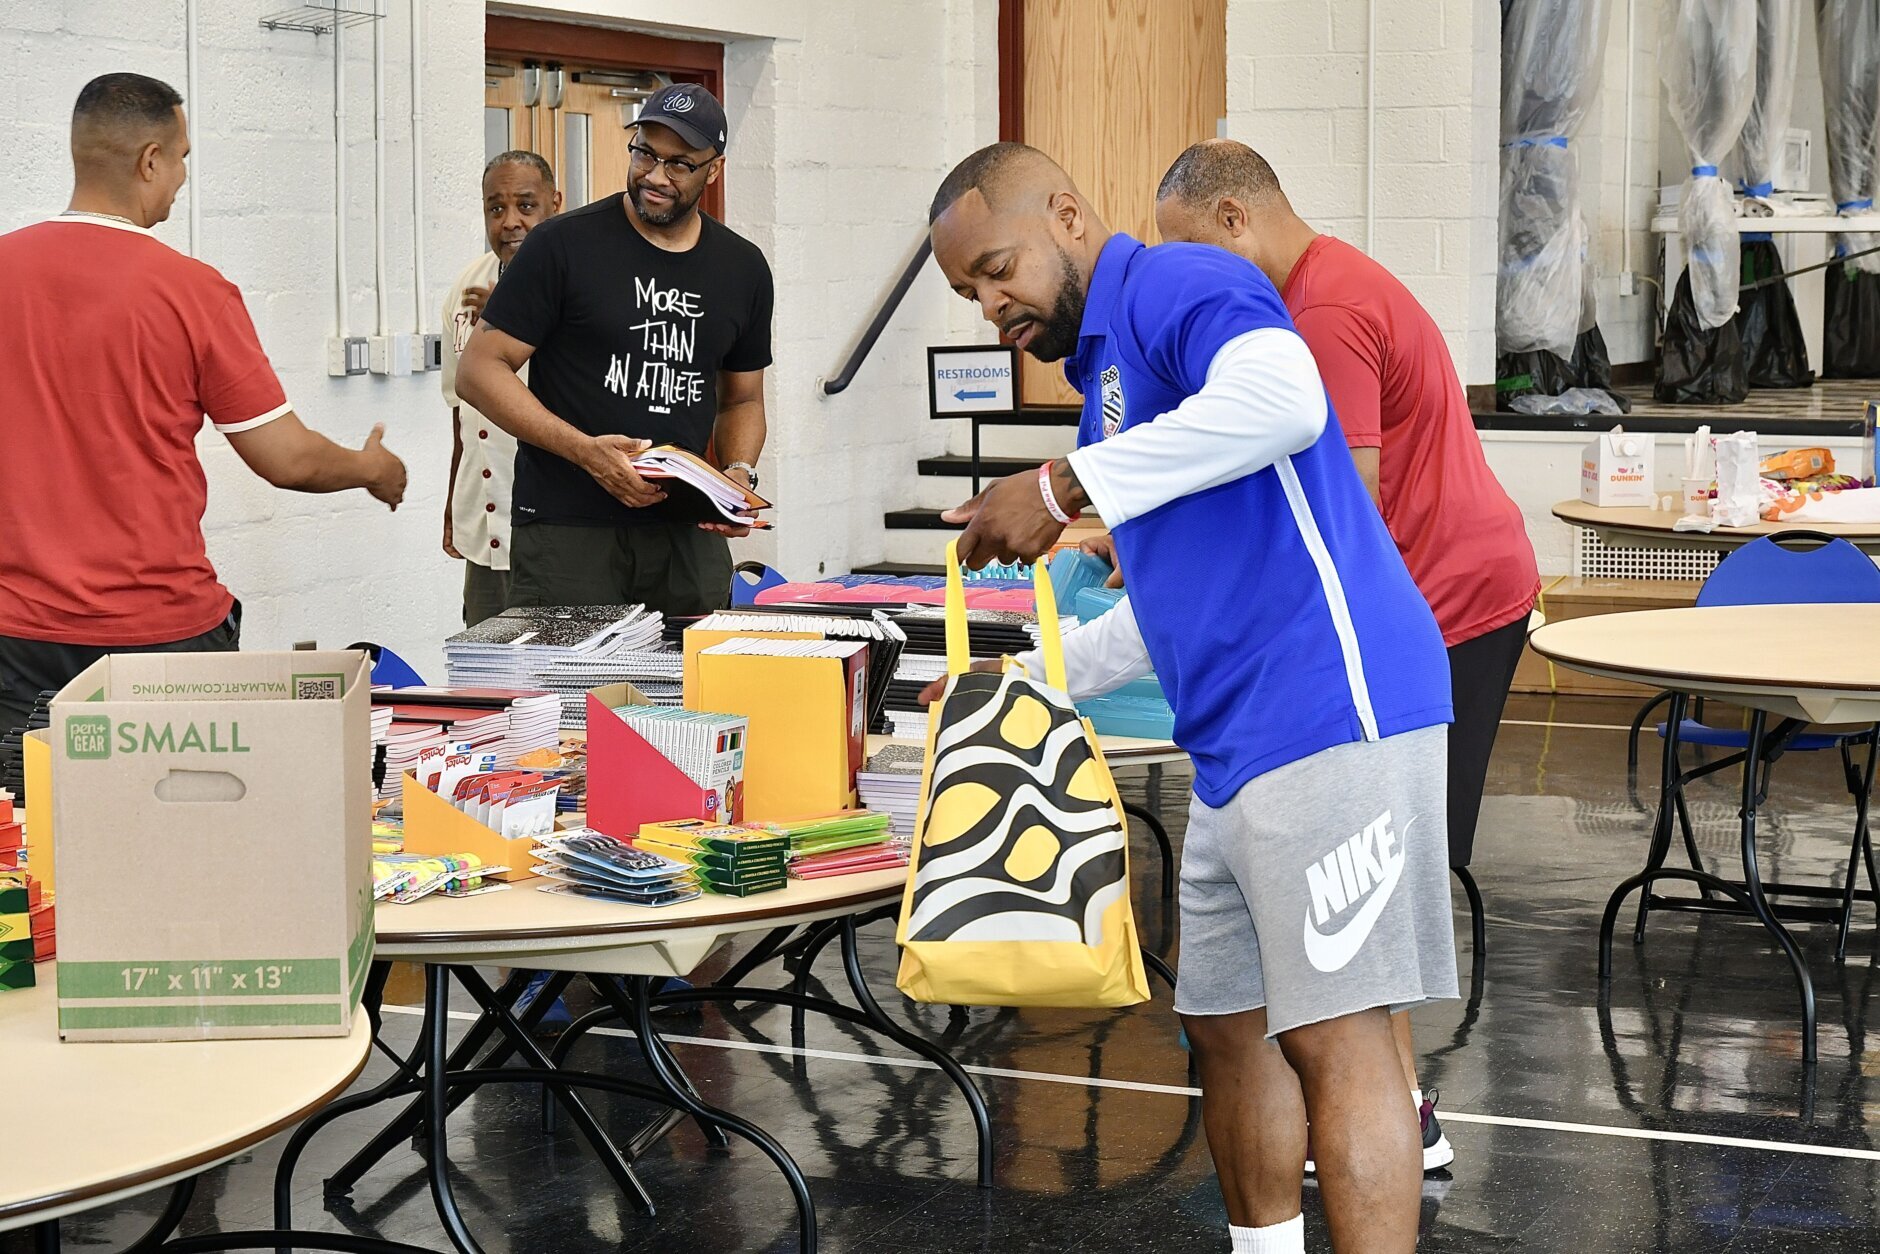 Volunteers help fill bags with school supplies at the "Stuff the Backpack Drive" on Saturday.